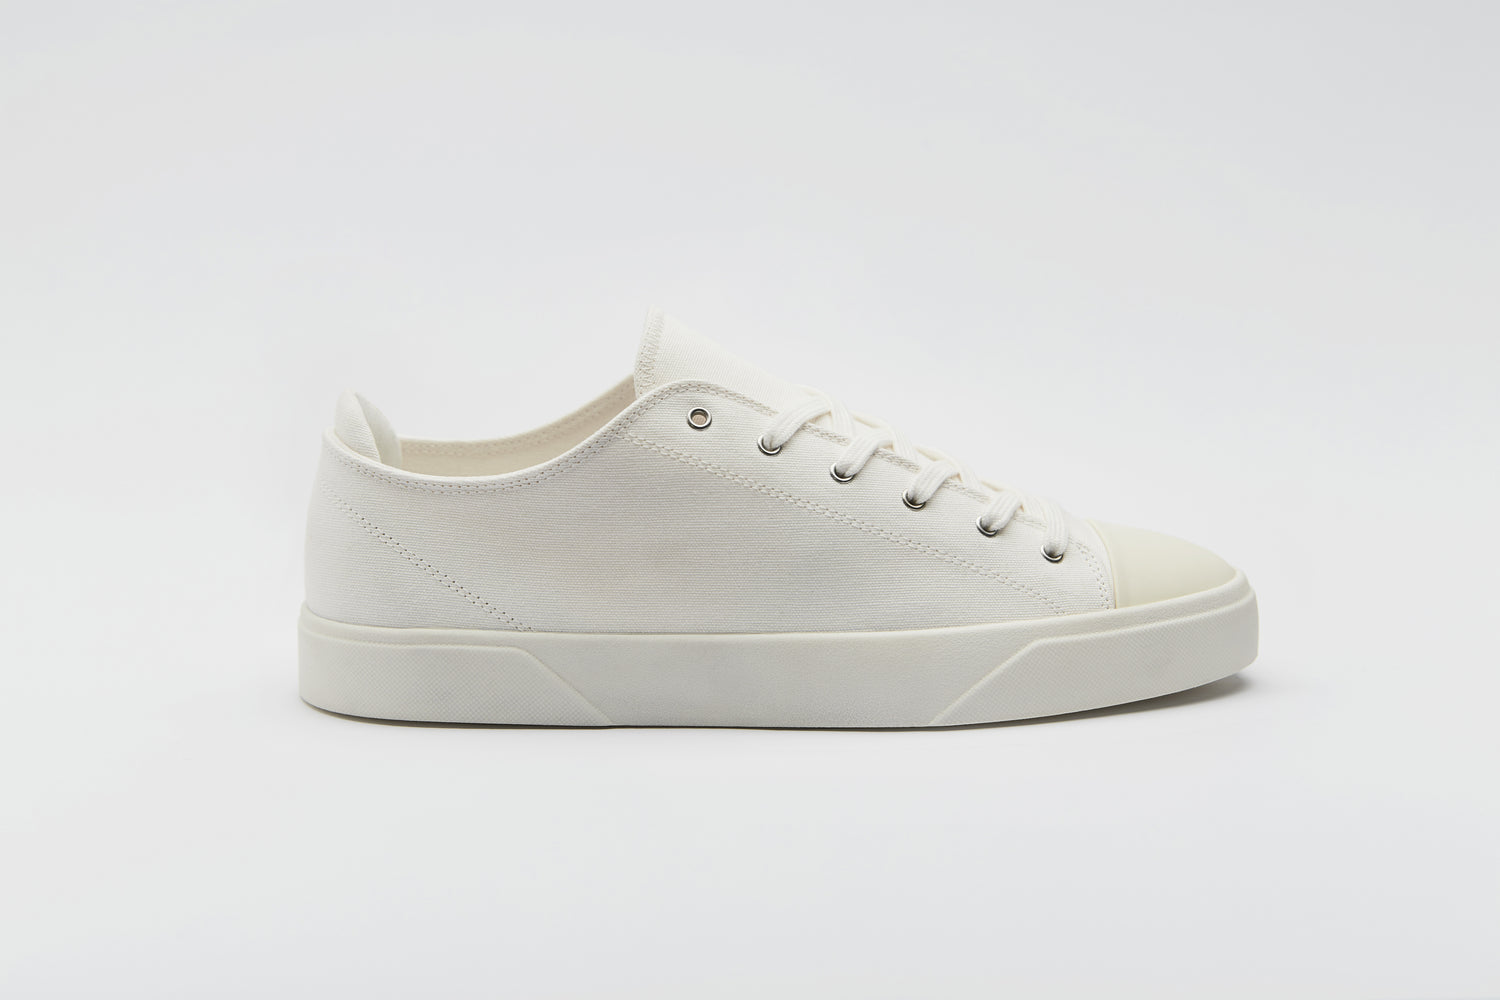 Premium white summer shoe, made with a high-quality organic cotton canvas.